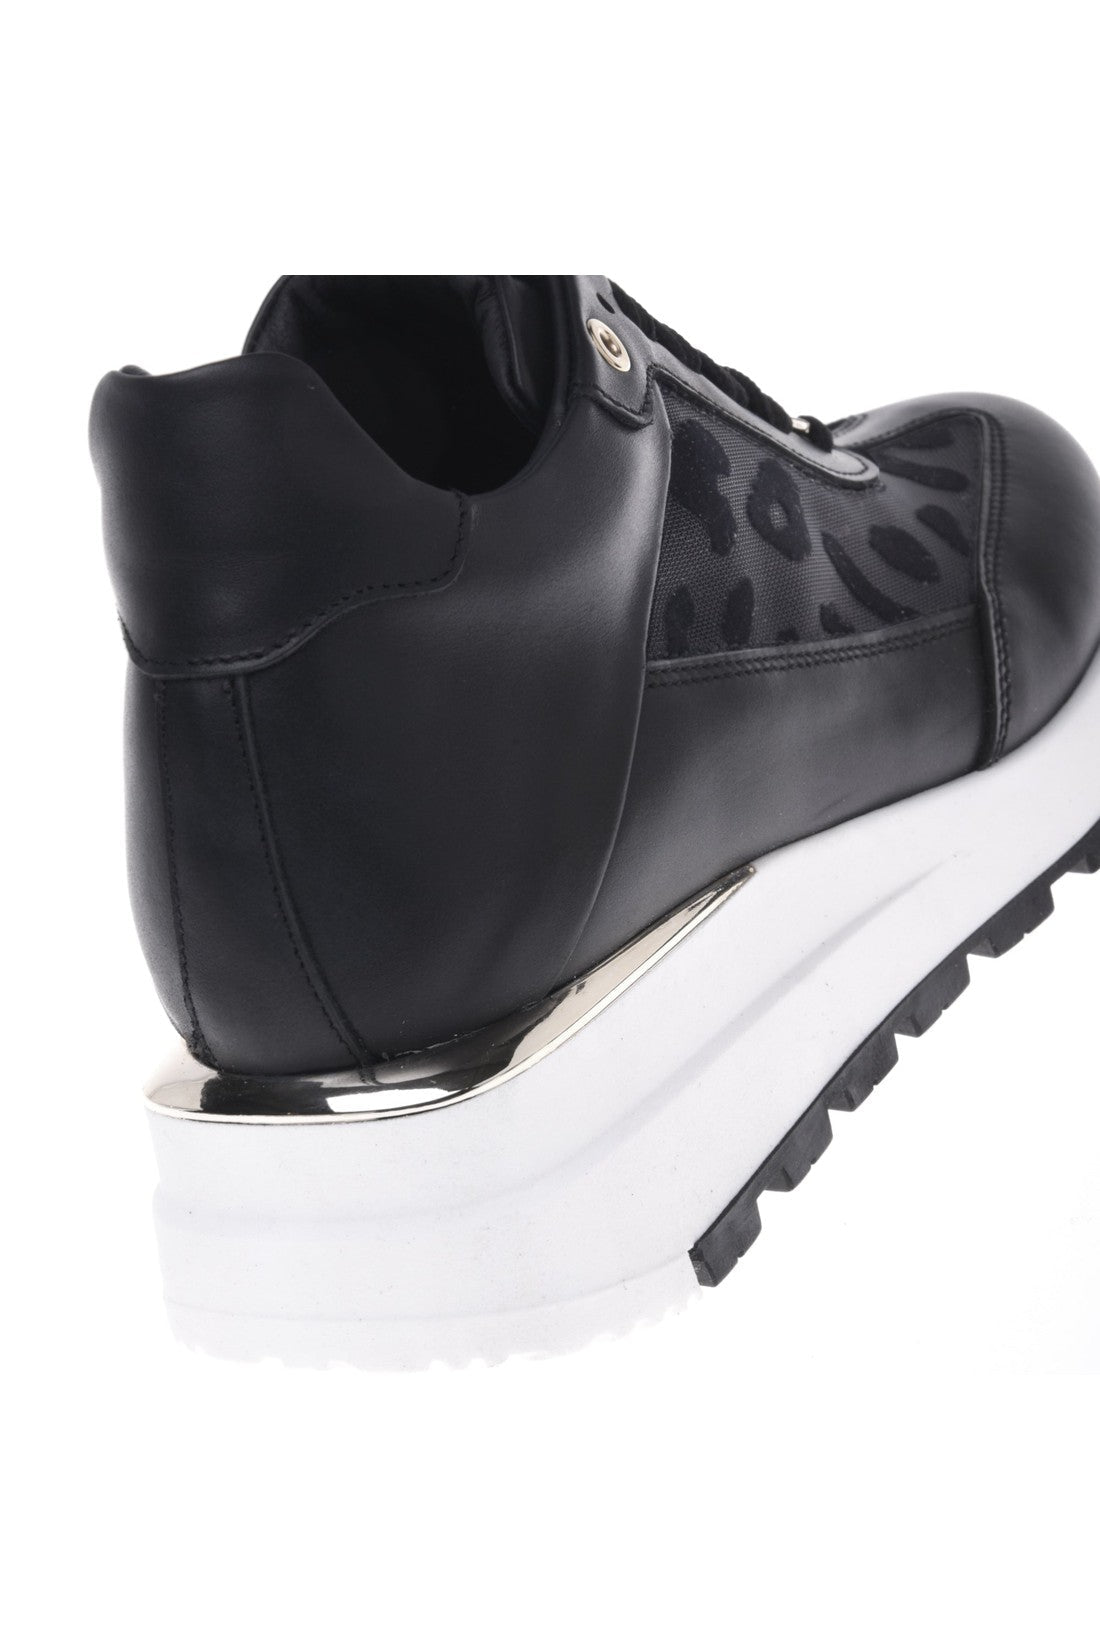 Sneaker in black nappa leather and lace